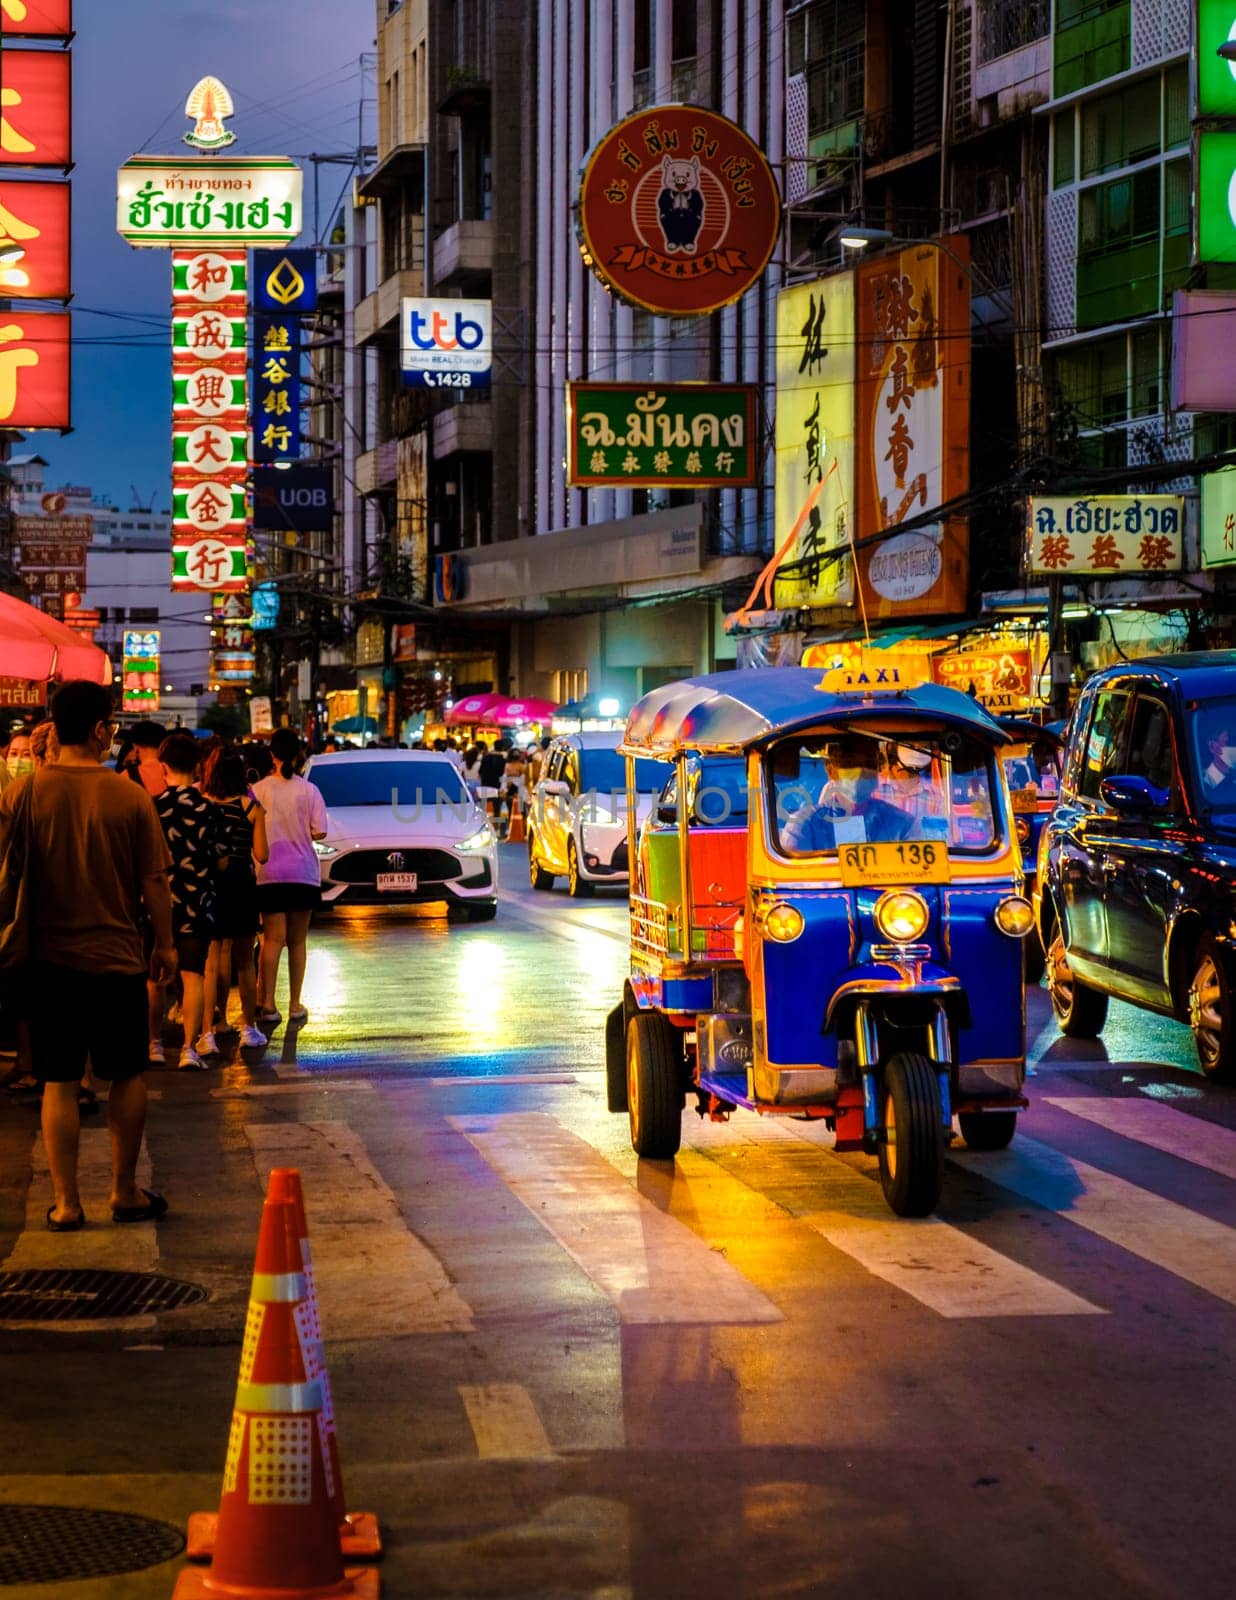 colorful tuk tuk in the city China town with neon lights by fokkebok